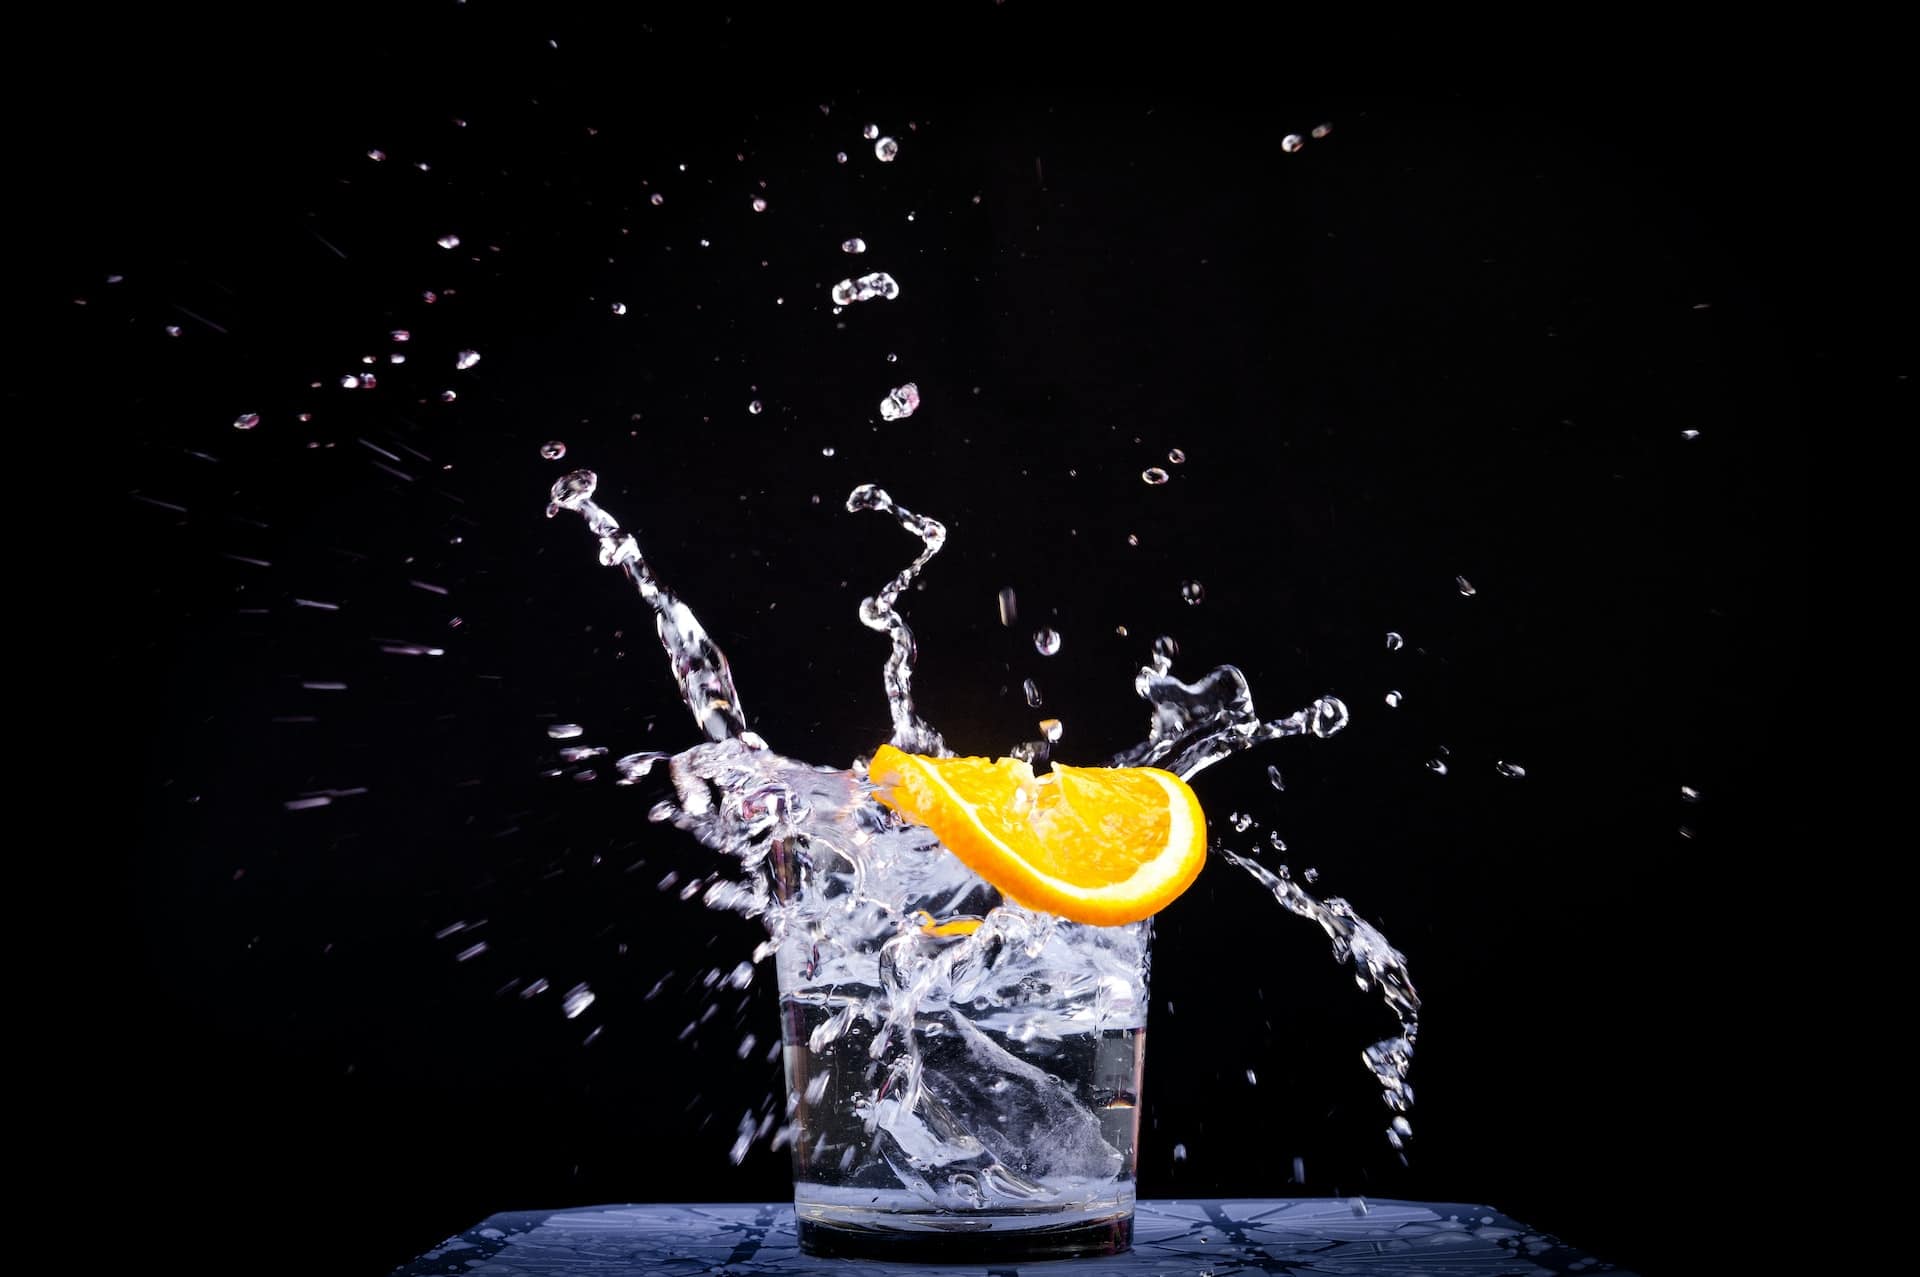 A glass of water and a slice of orange being splashed